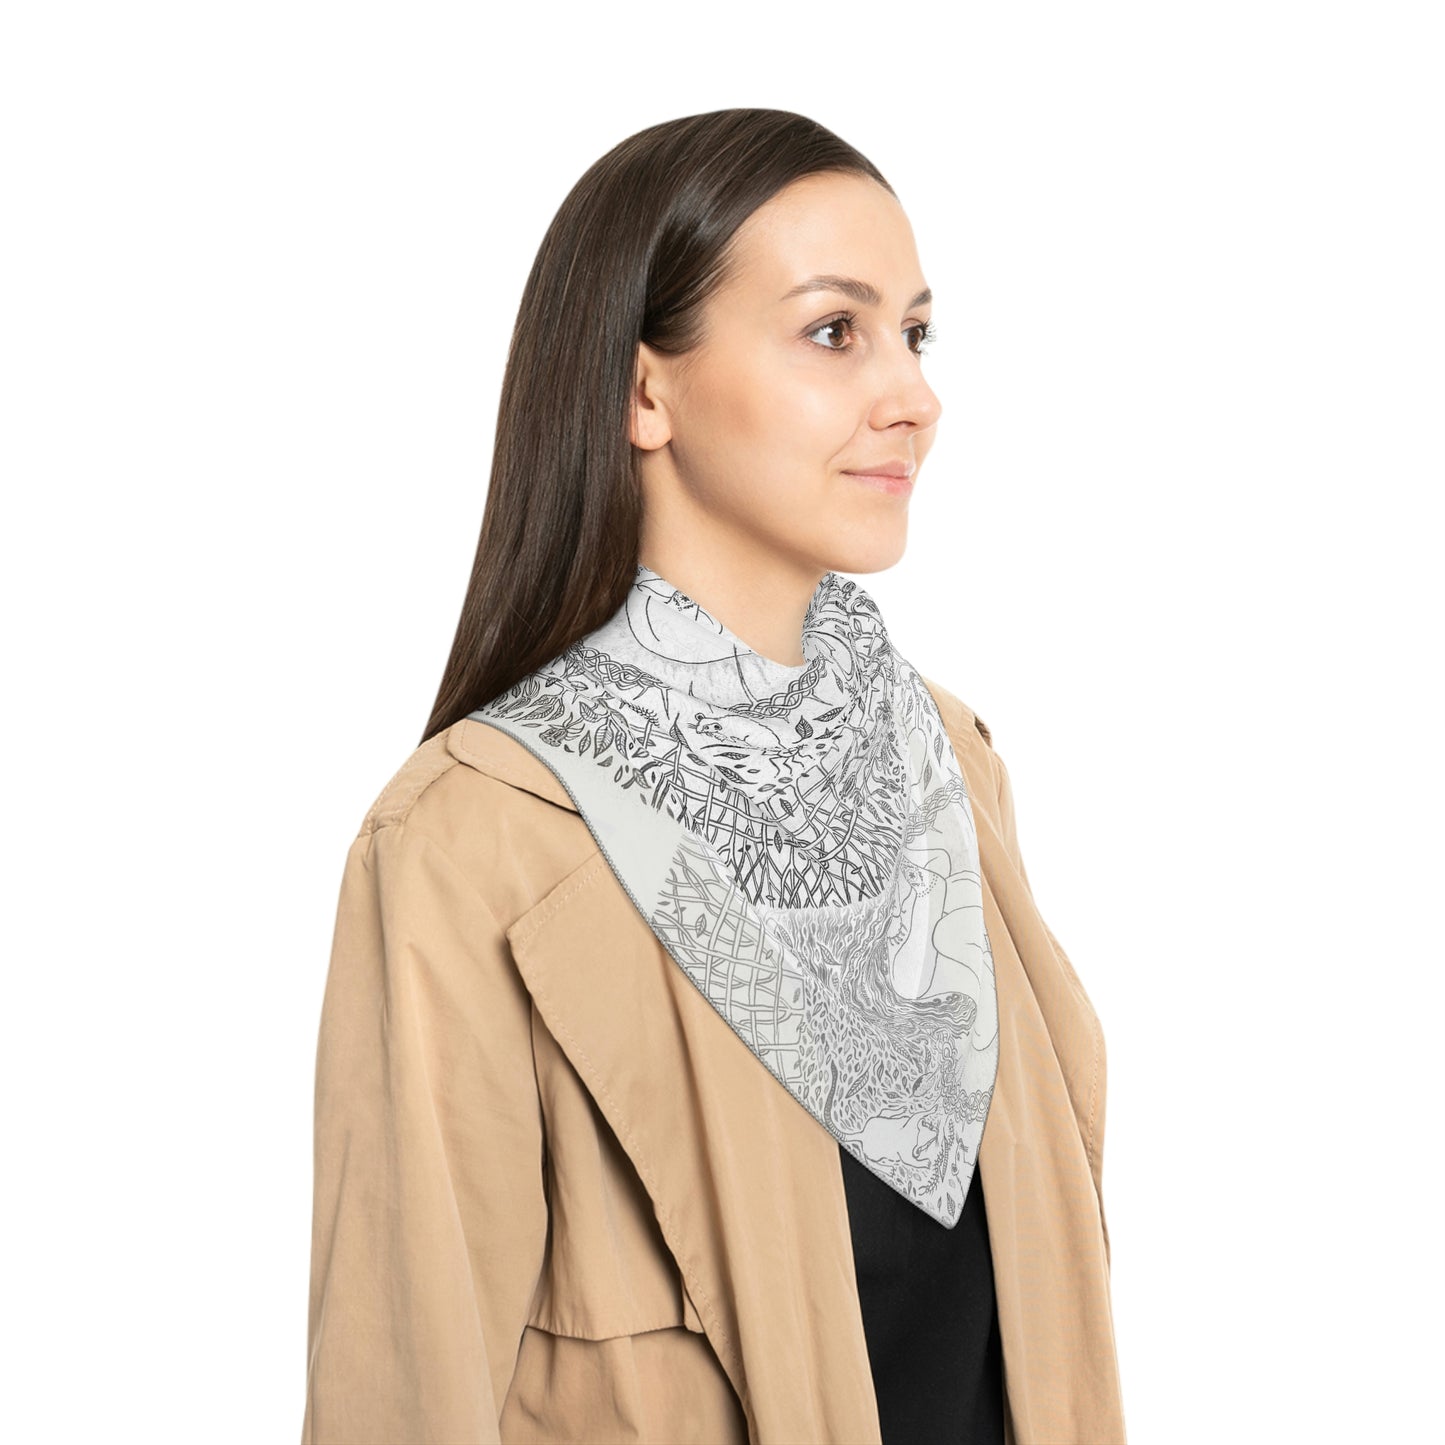 Chinese Years Zodiac Sign Poly Scarf (Rat) White